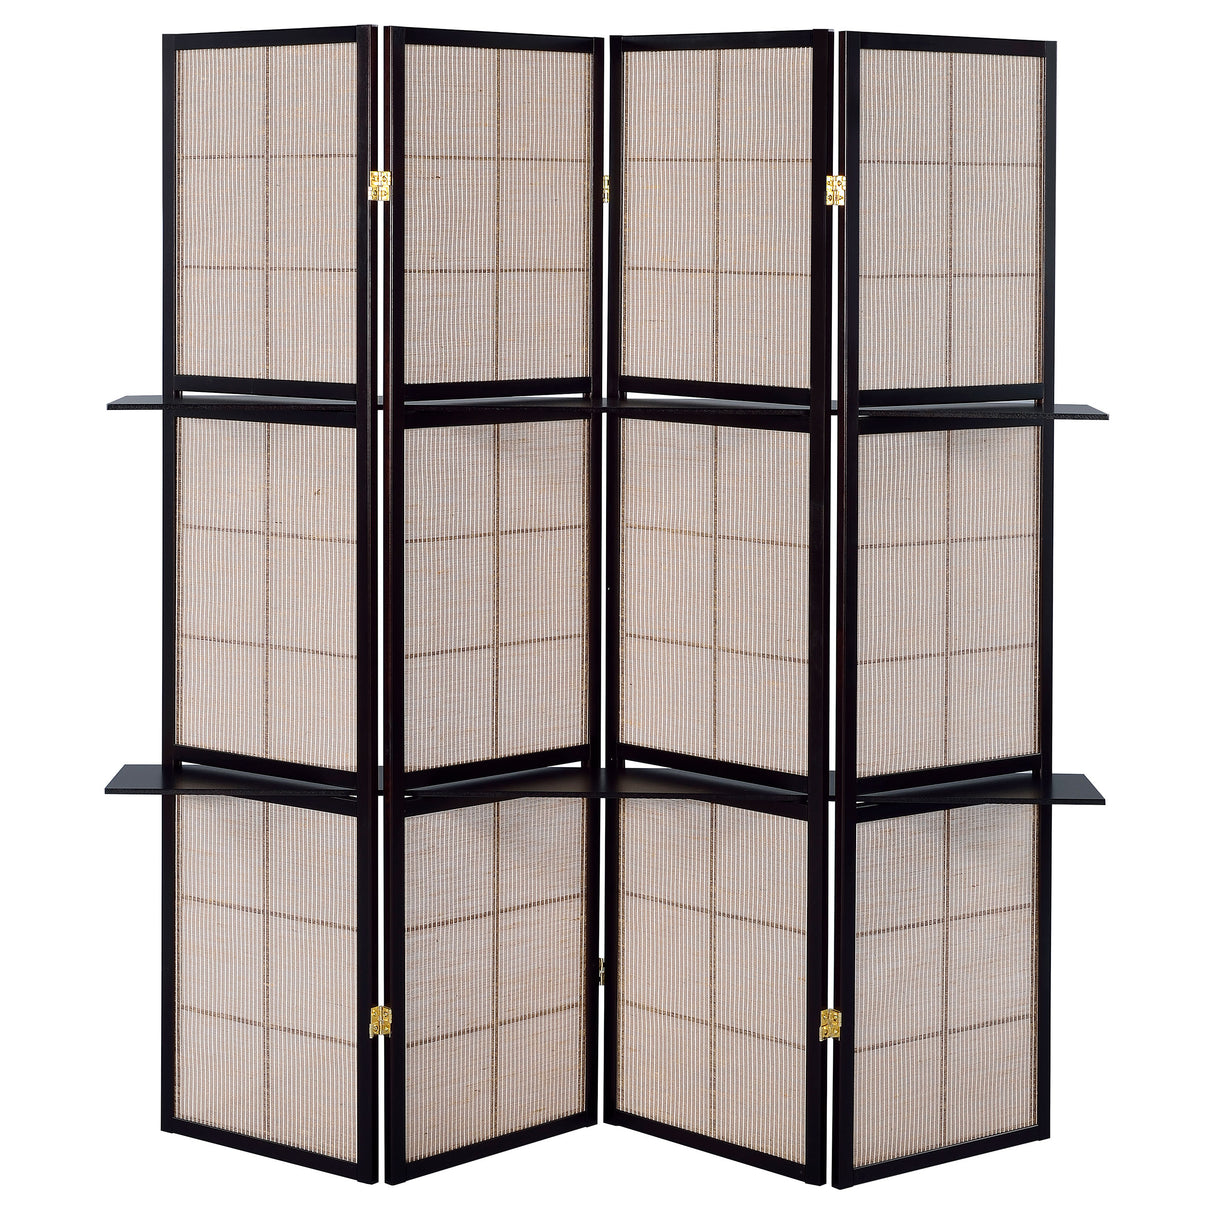 4 Panel Room Divider - Iggy 4-panel Folding Screen with Removable Shelves Tan and Cappuccino